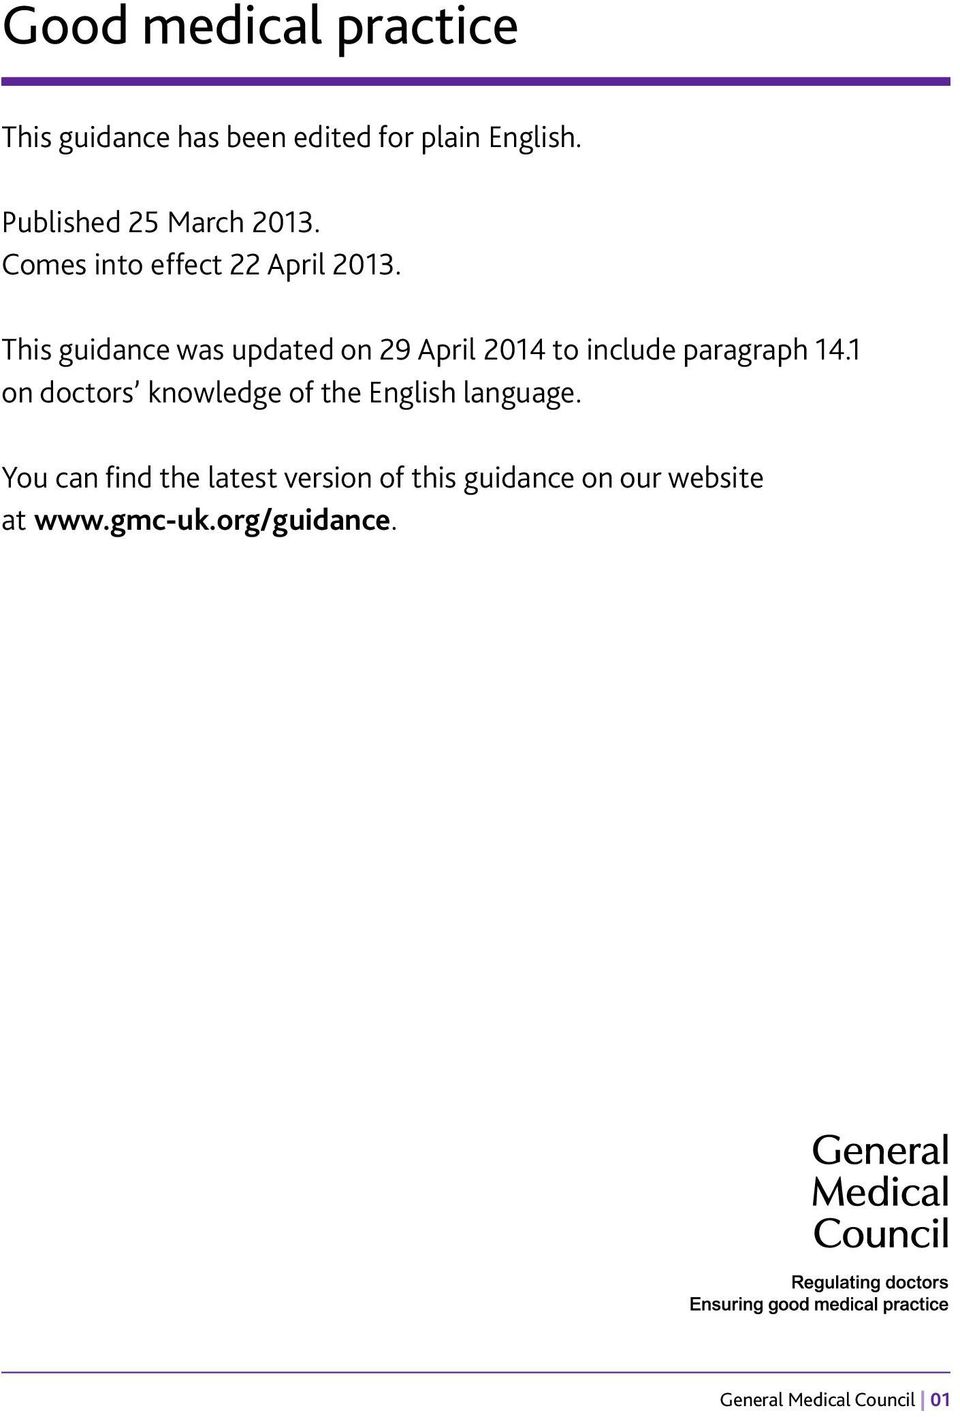 This guidance was updated on 29 April 2014 to include paragraph 14.